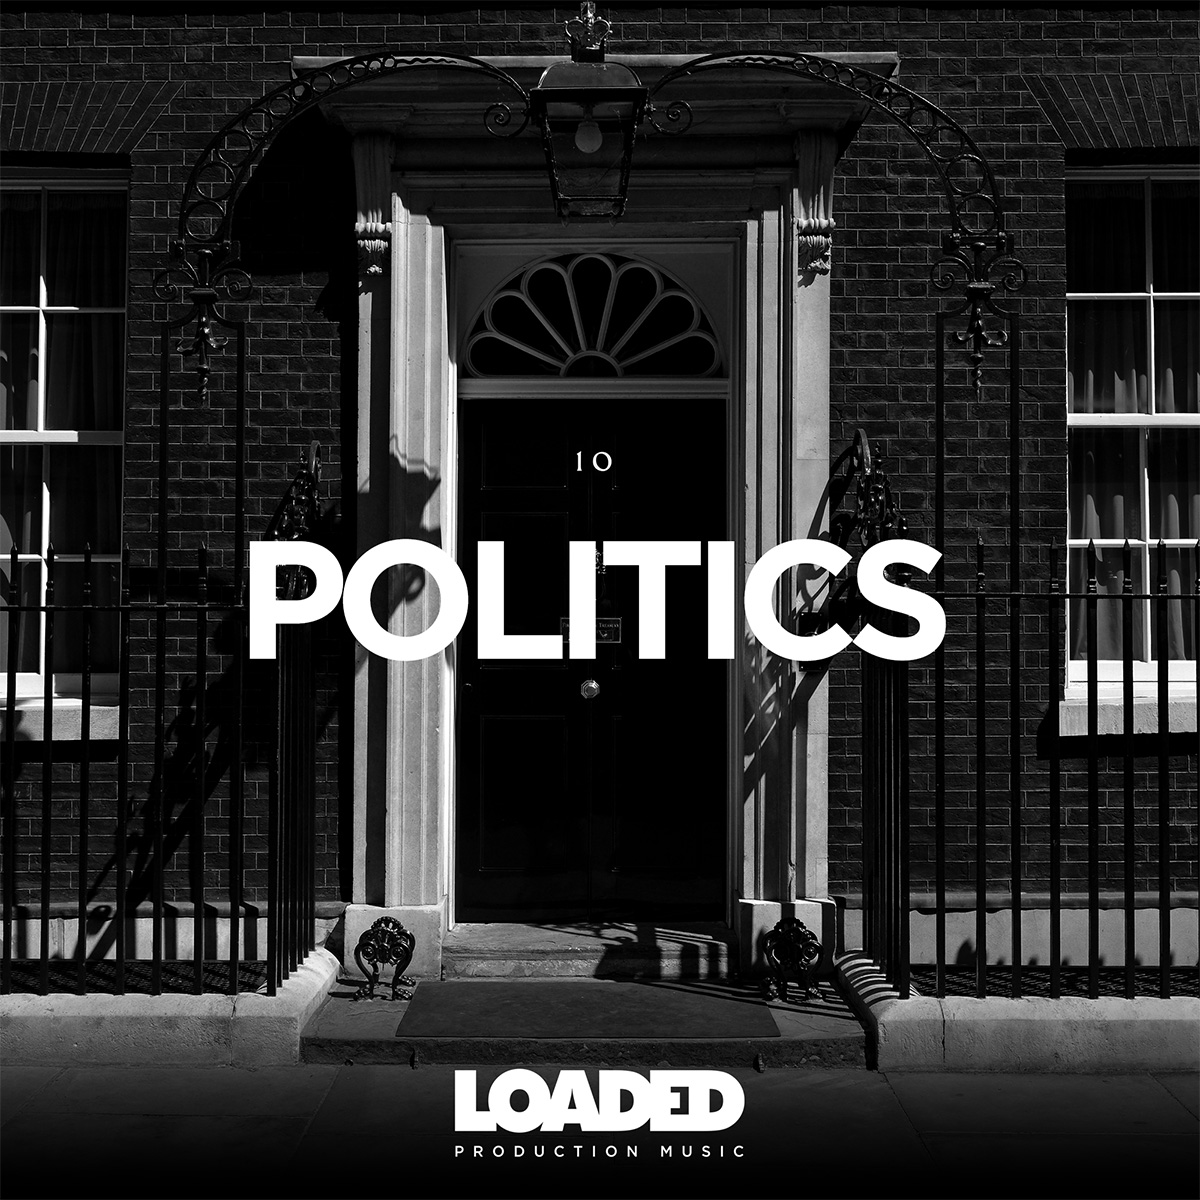 Politics playlist artwork with black and white number 10 door